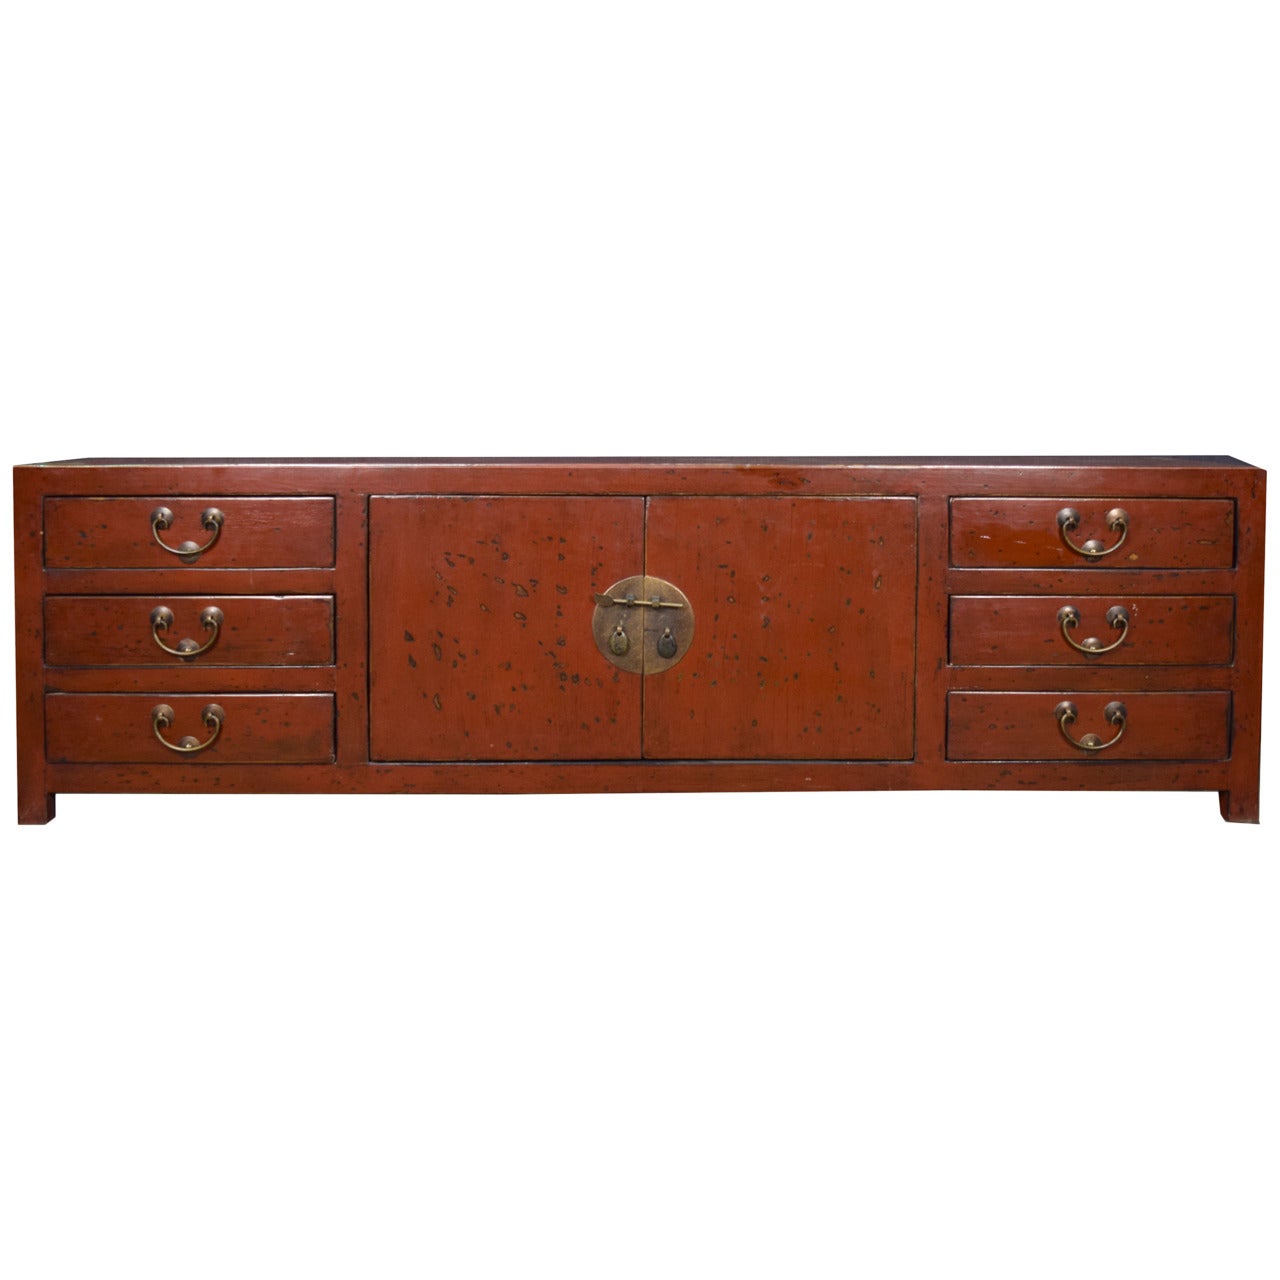 Six-Drawer Two-Door Low Red Lacquer Chest